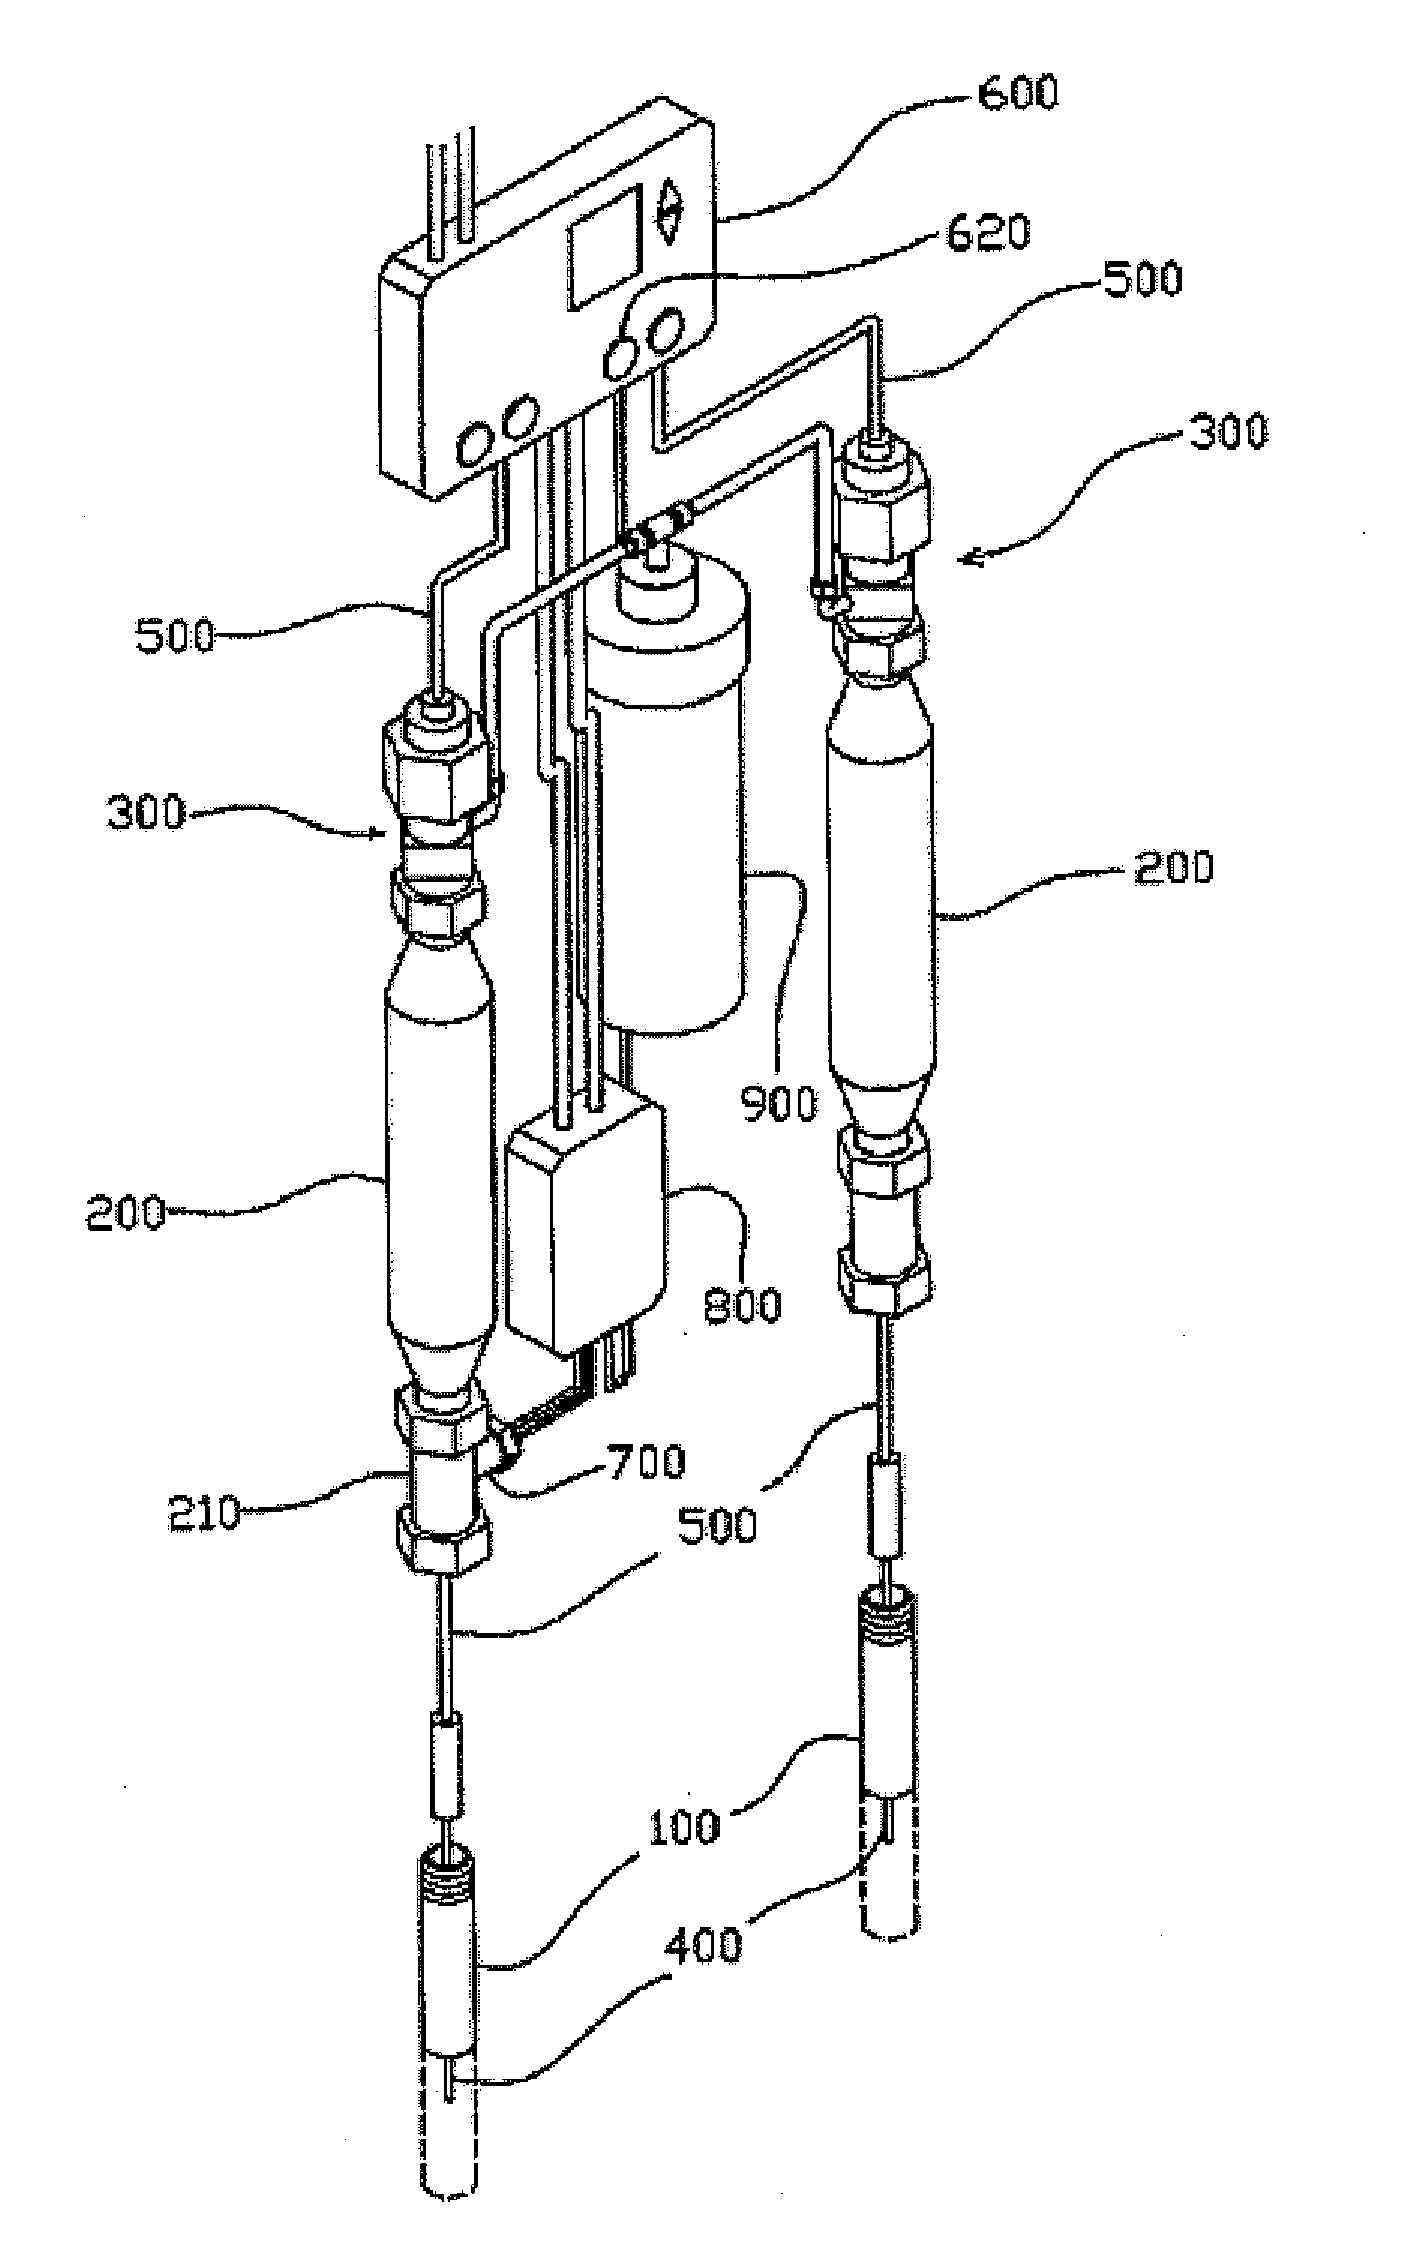 Structure of hot water pipe inserted with heating wire